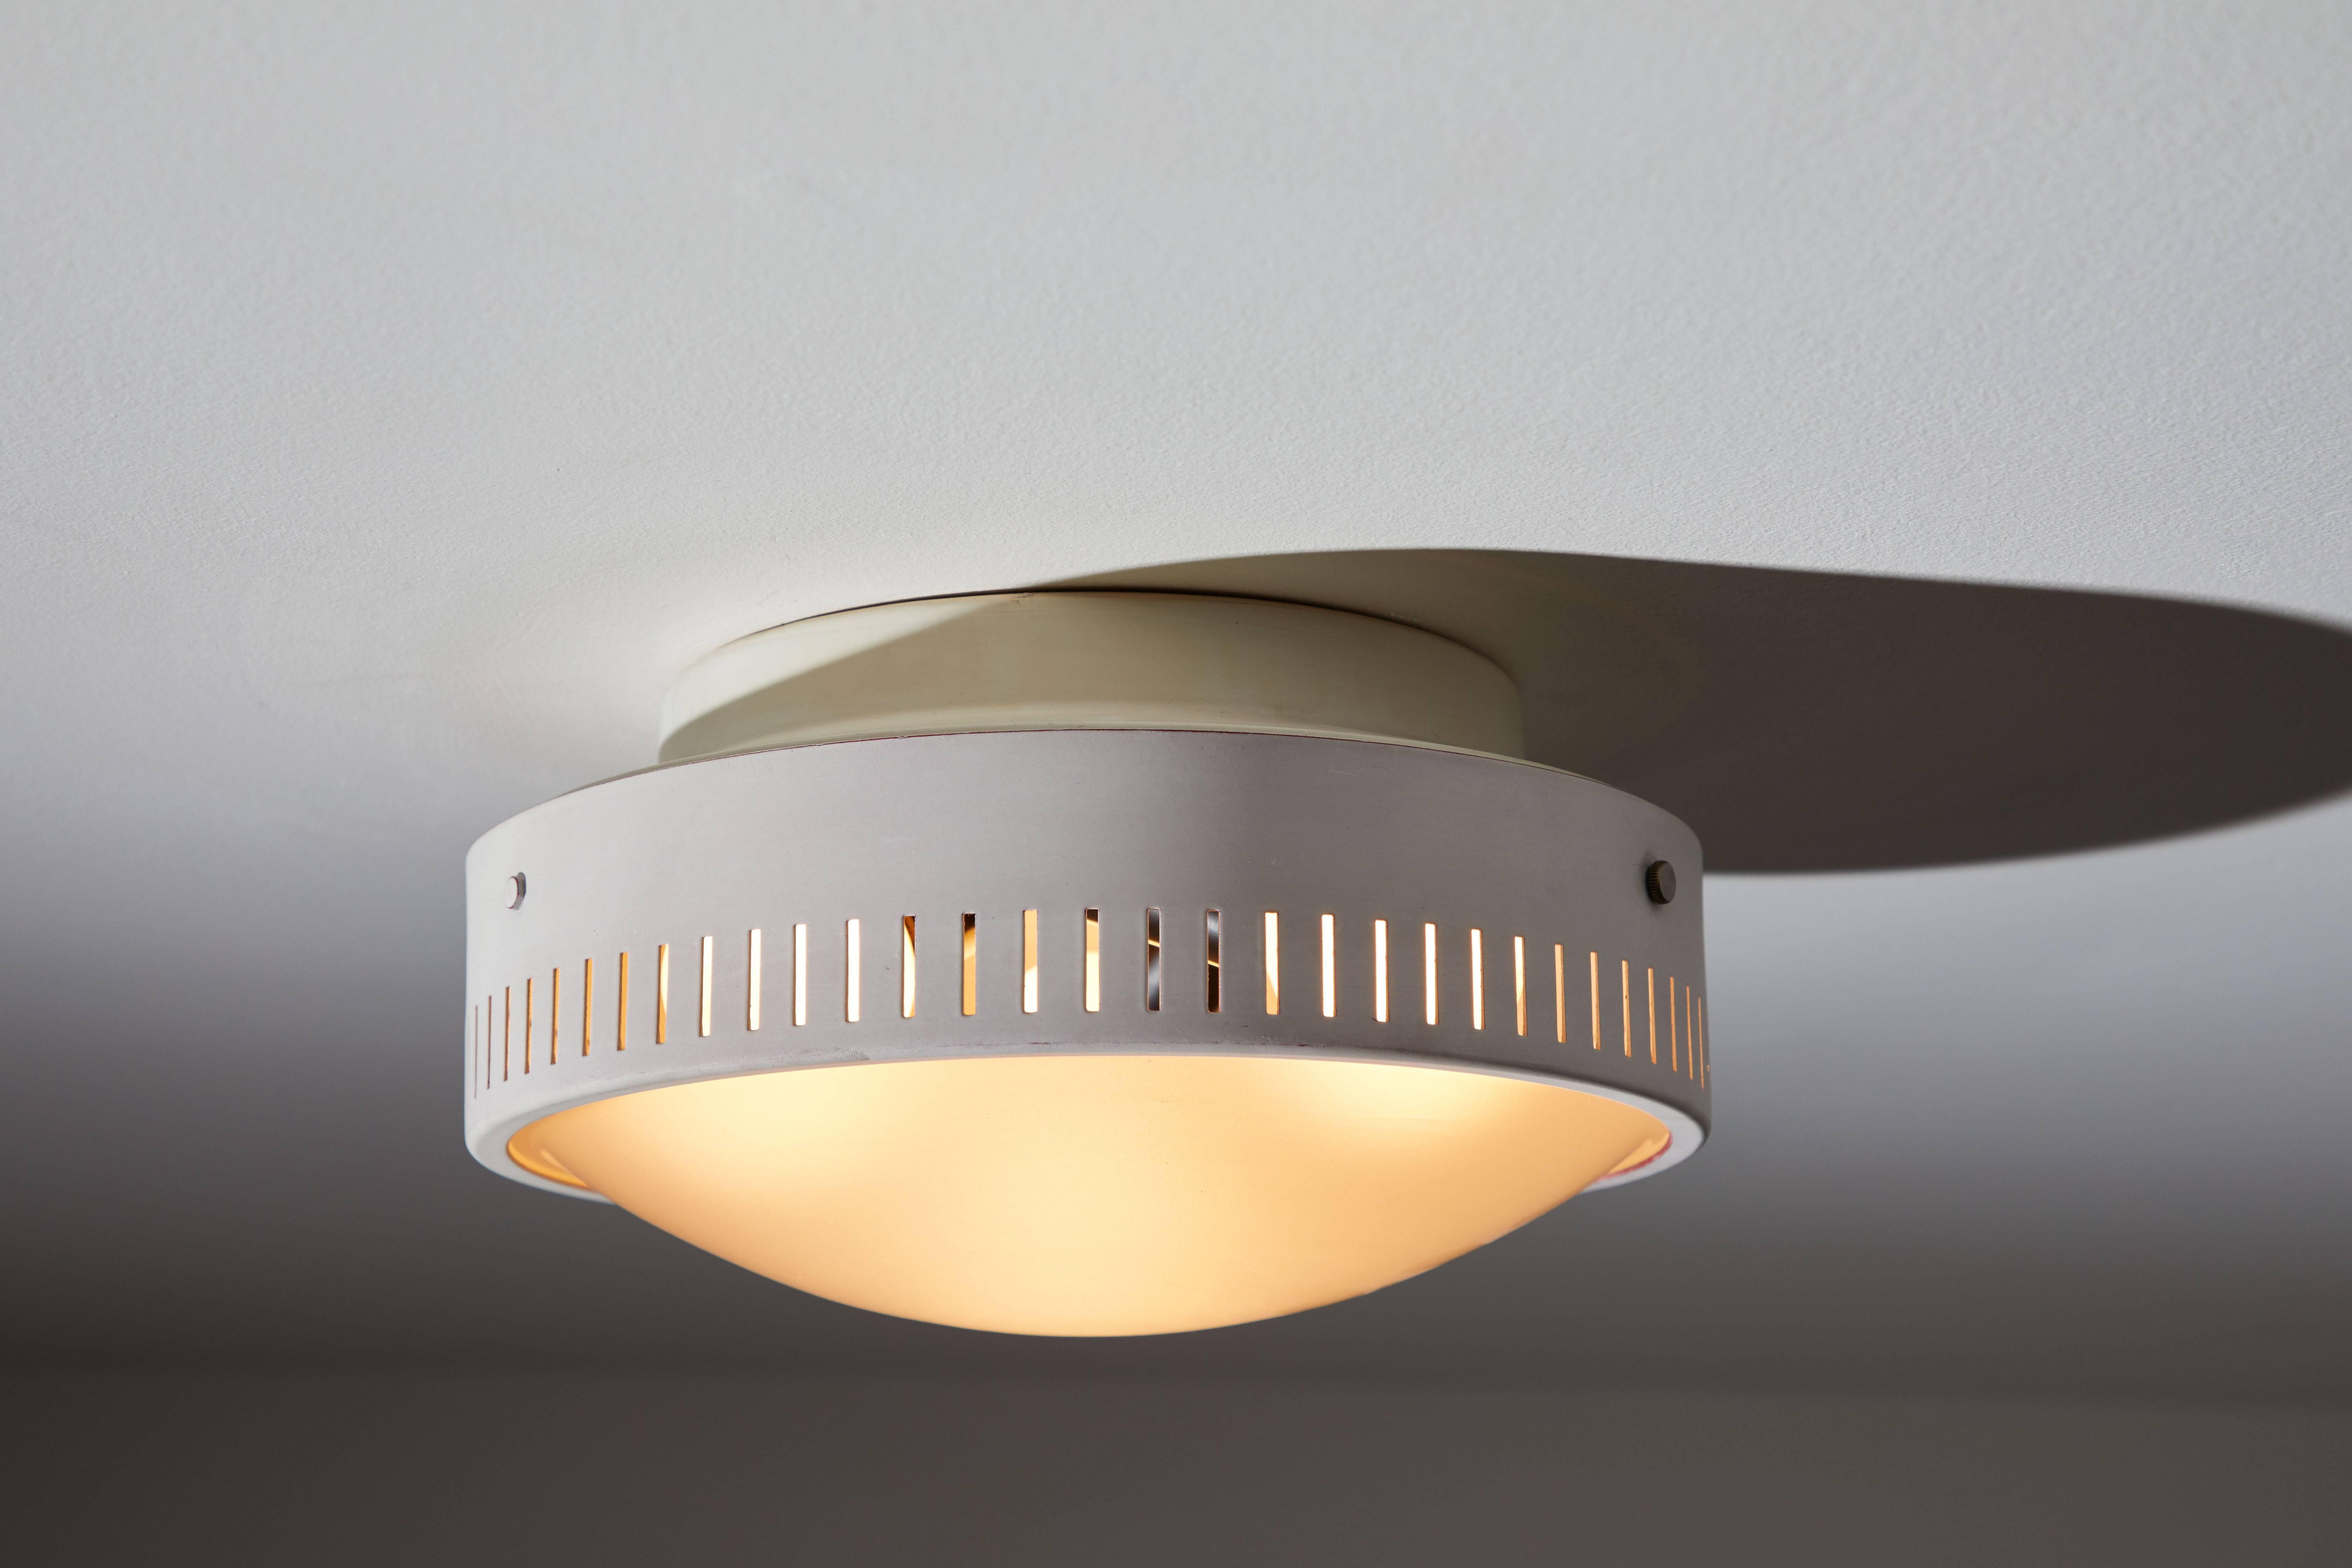 Flush mount ceiling light manufactured by Stilnovo in, Italy, circa 1950s. Enameled, perforated metal. Matte glass diffuser. Retains a part of the original manufacturer's label. Rewired for US junction boxes. Takes three E14 75w maximum bulbs.